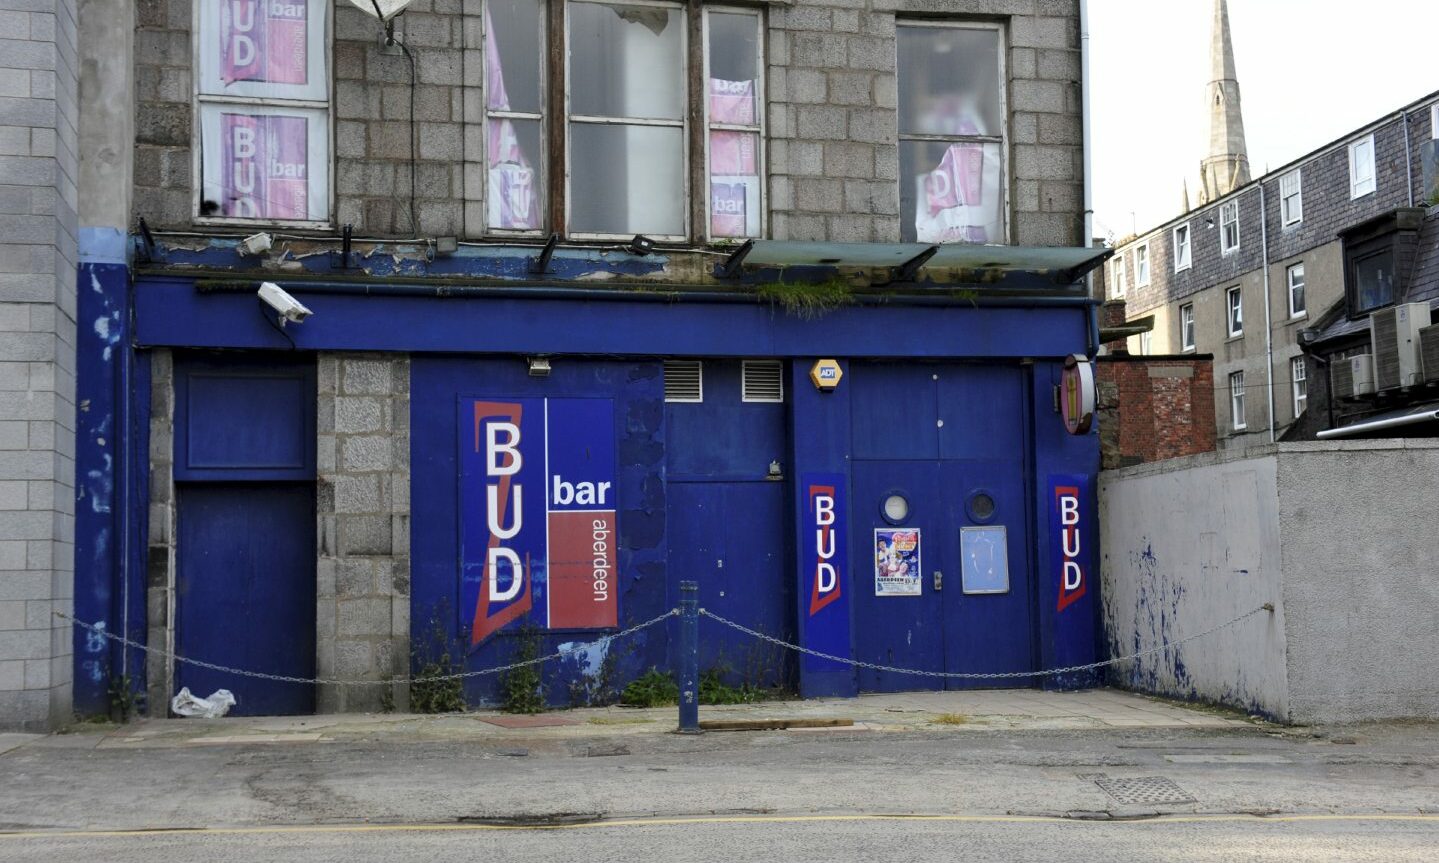 Exterior of the former Budz Bar in a state of disrepair in 2015.